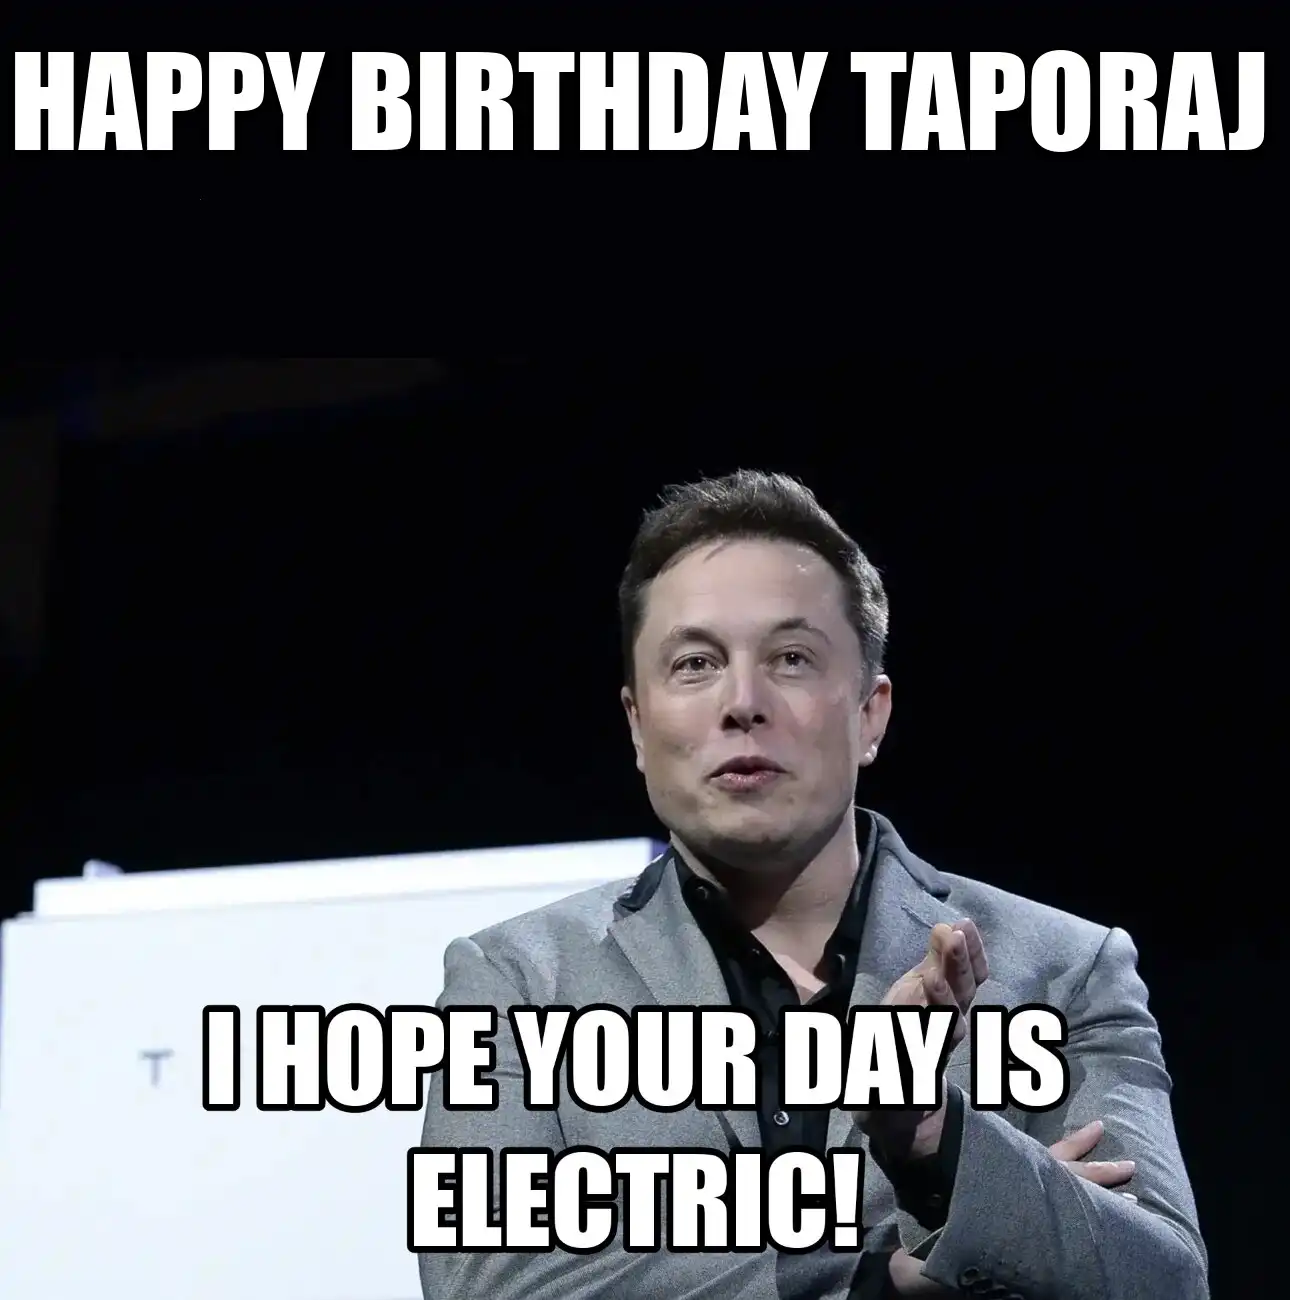 Happy Birthday Taporaj I Hope Your Day Is Electric Meme